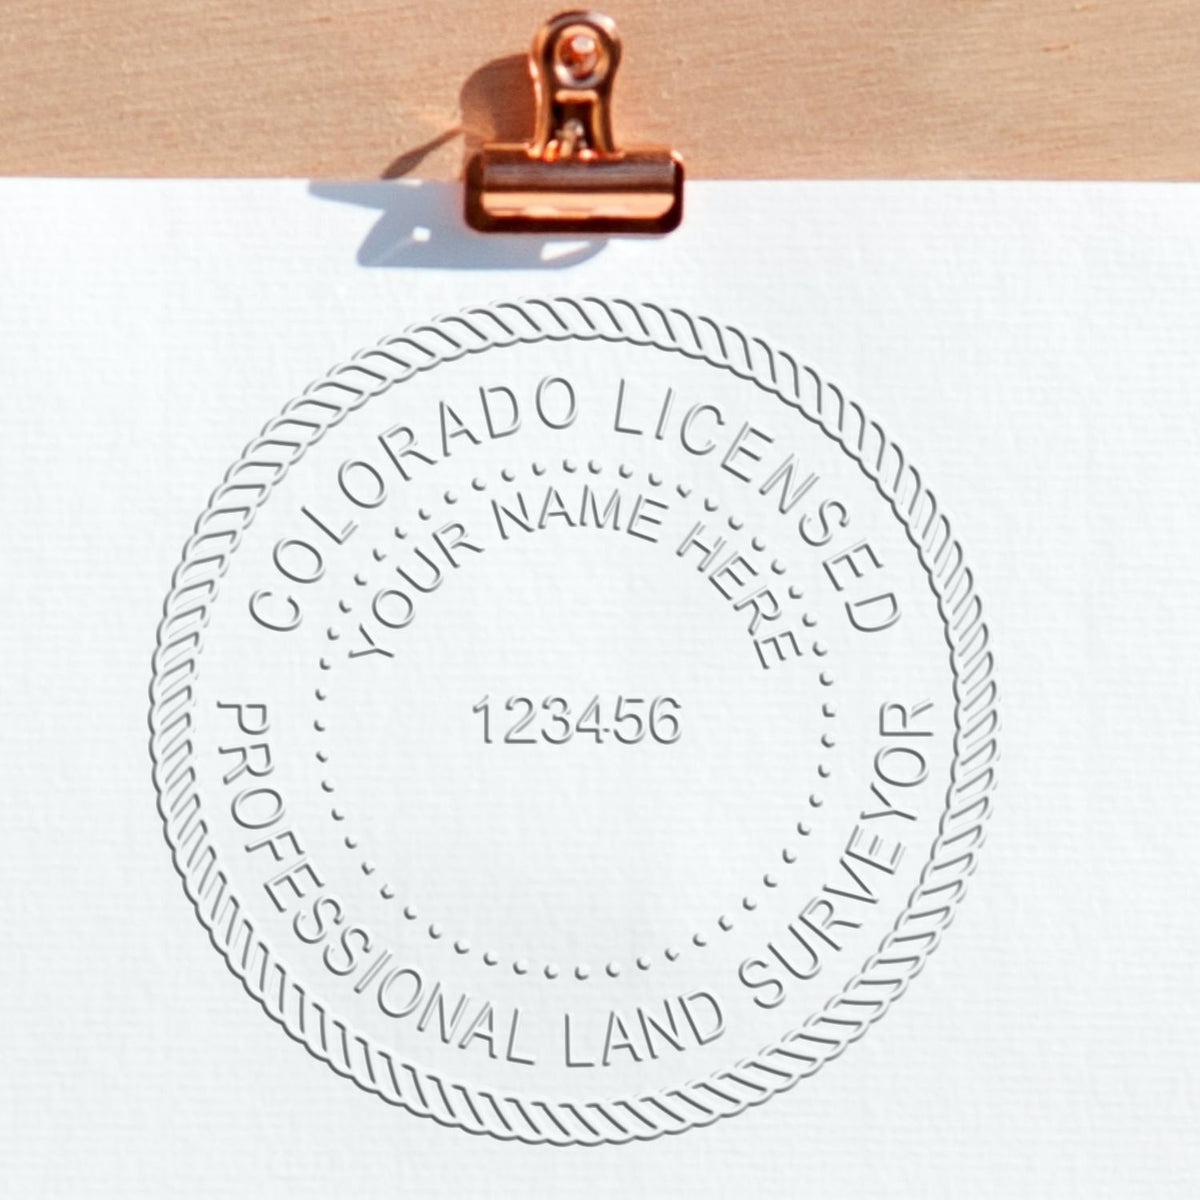 A stamped imprint of the Gift Colorado Land Surveyor Seal in this stylish lifestyle photo, setting the tone for a unique and personalized product.